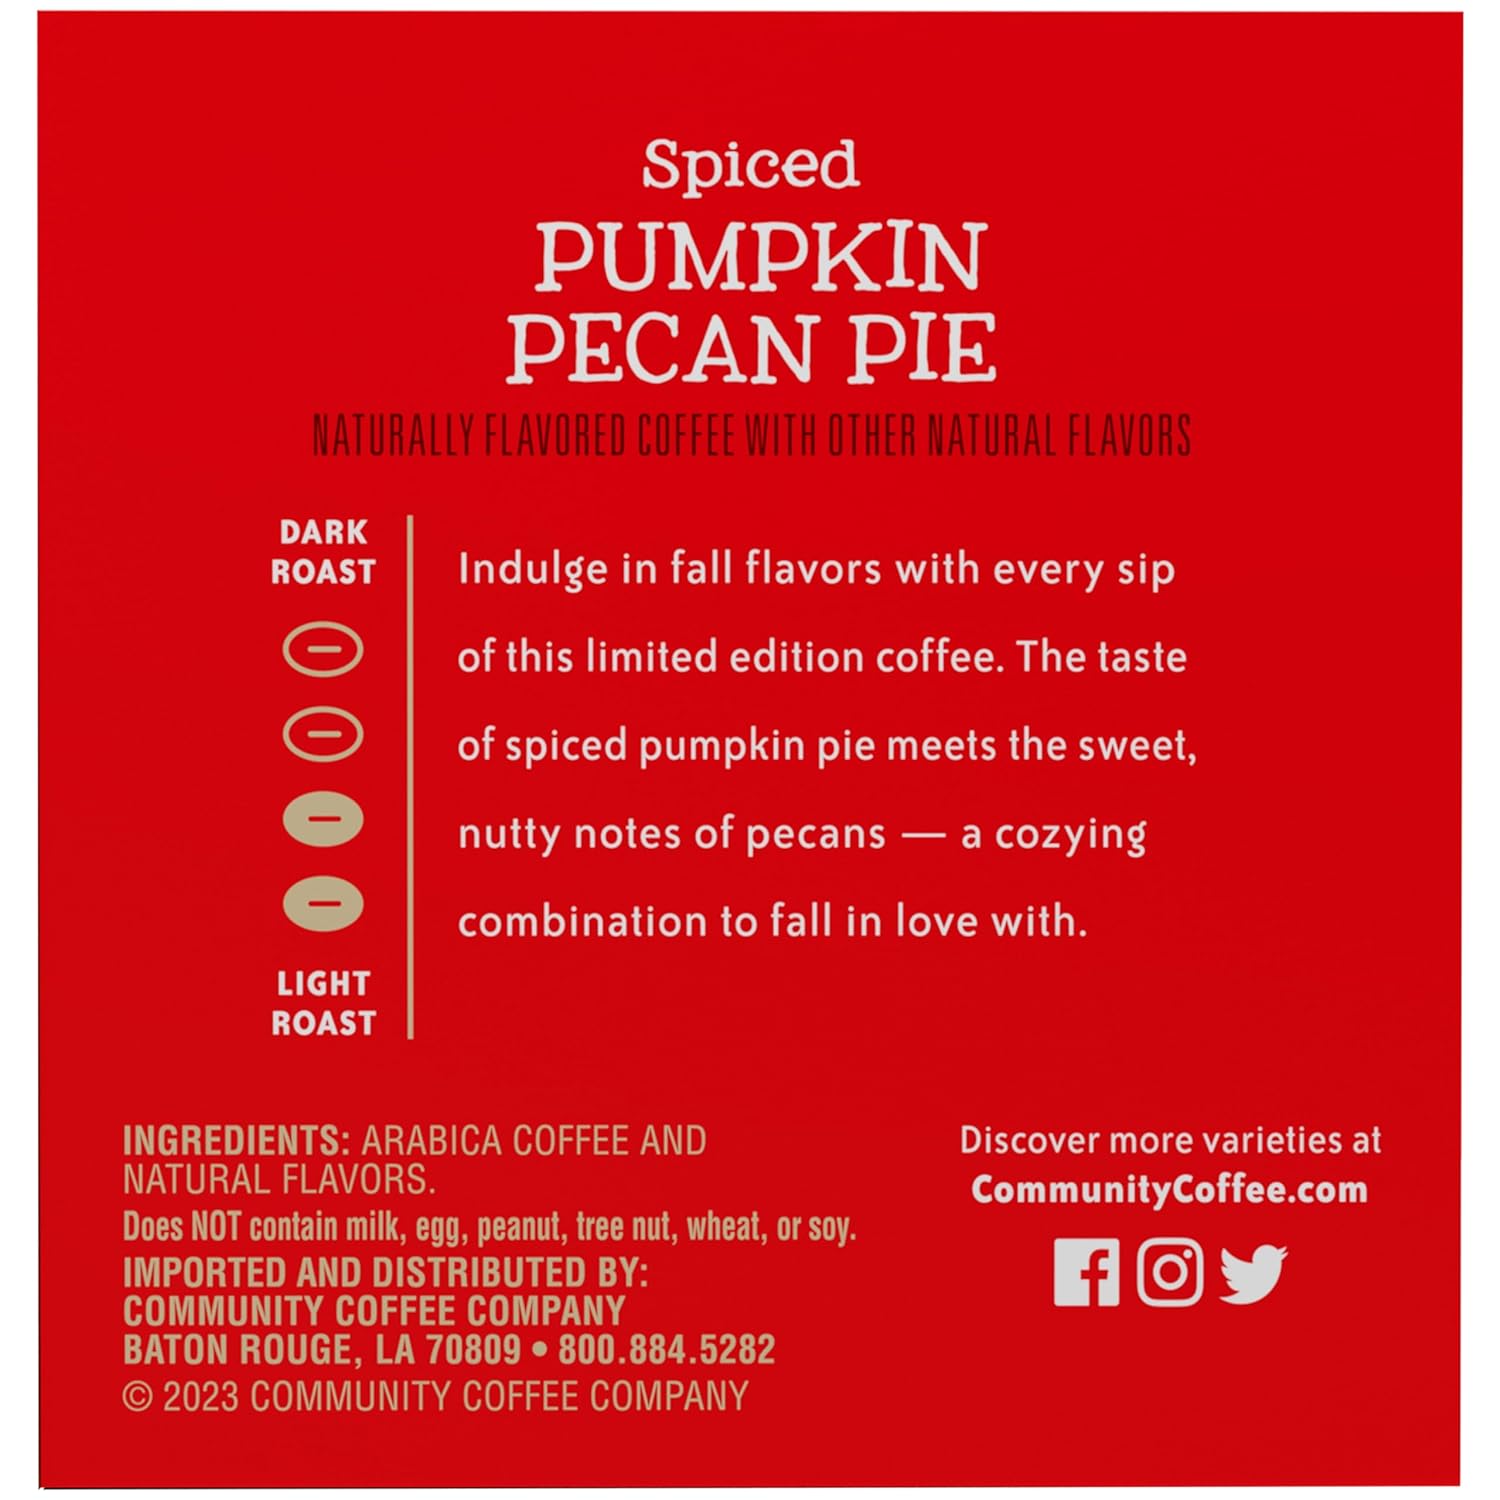 Community Coffee Spiced Pumpkin Pecan Pie Flavored 60 Count Coffee Pods, Medium Roast Compatible with Keurig 2.0 K-Cup Brewers, 10 Count (Pack of 6) : Grocery & Gourmet Food